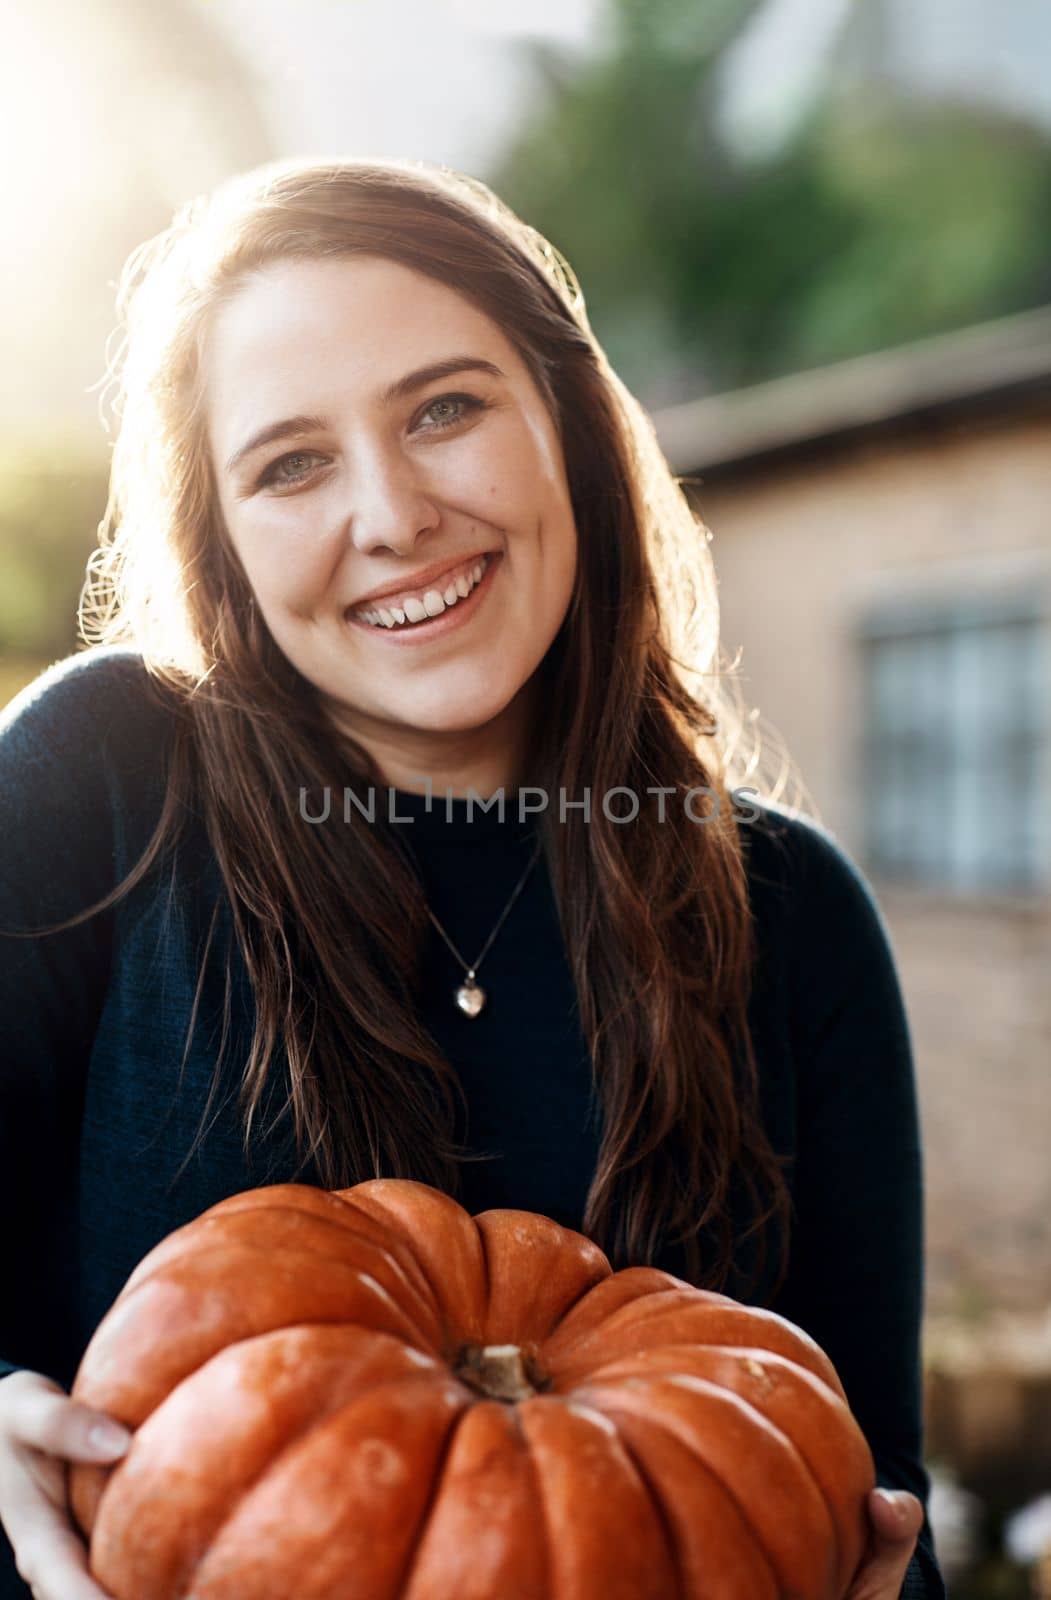 My favourite holiday is coming. Cropped portrait of an attractive young woman holding a pumpkin outside